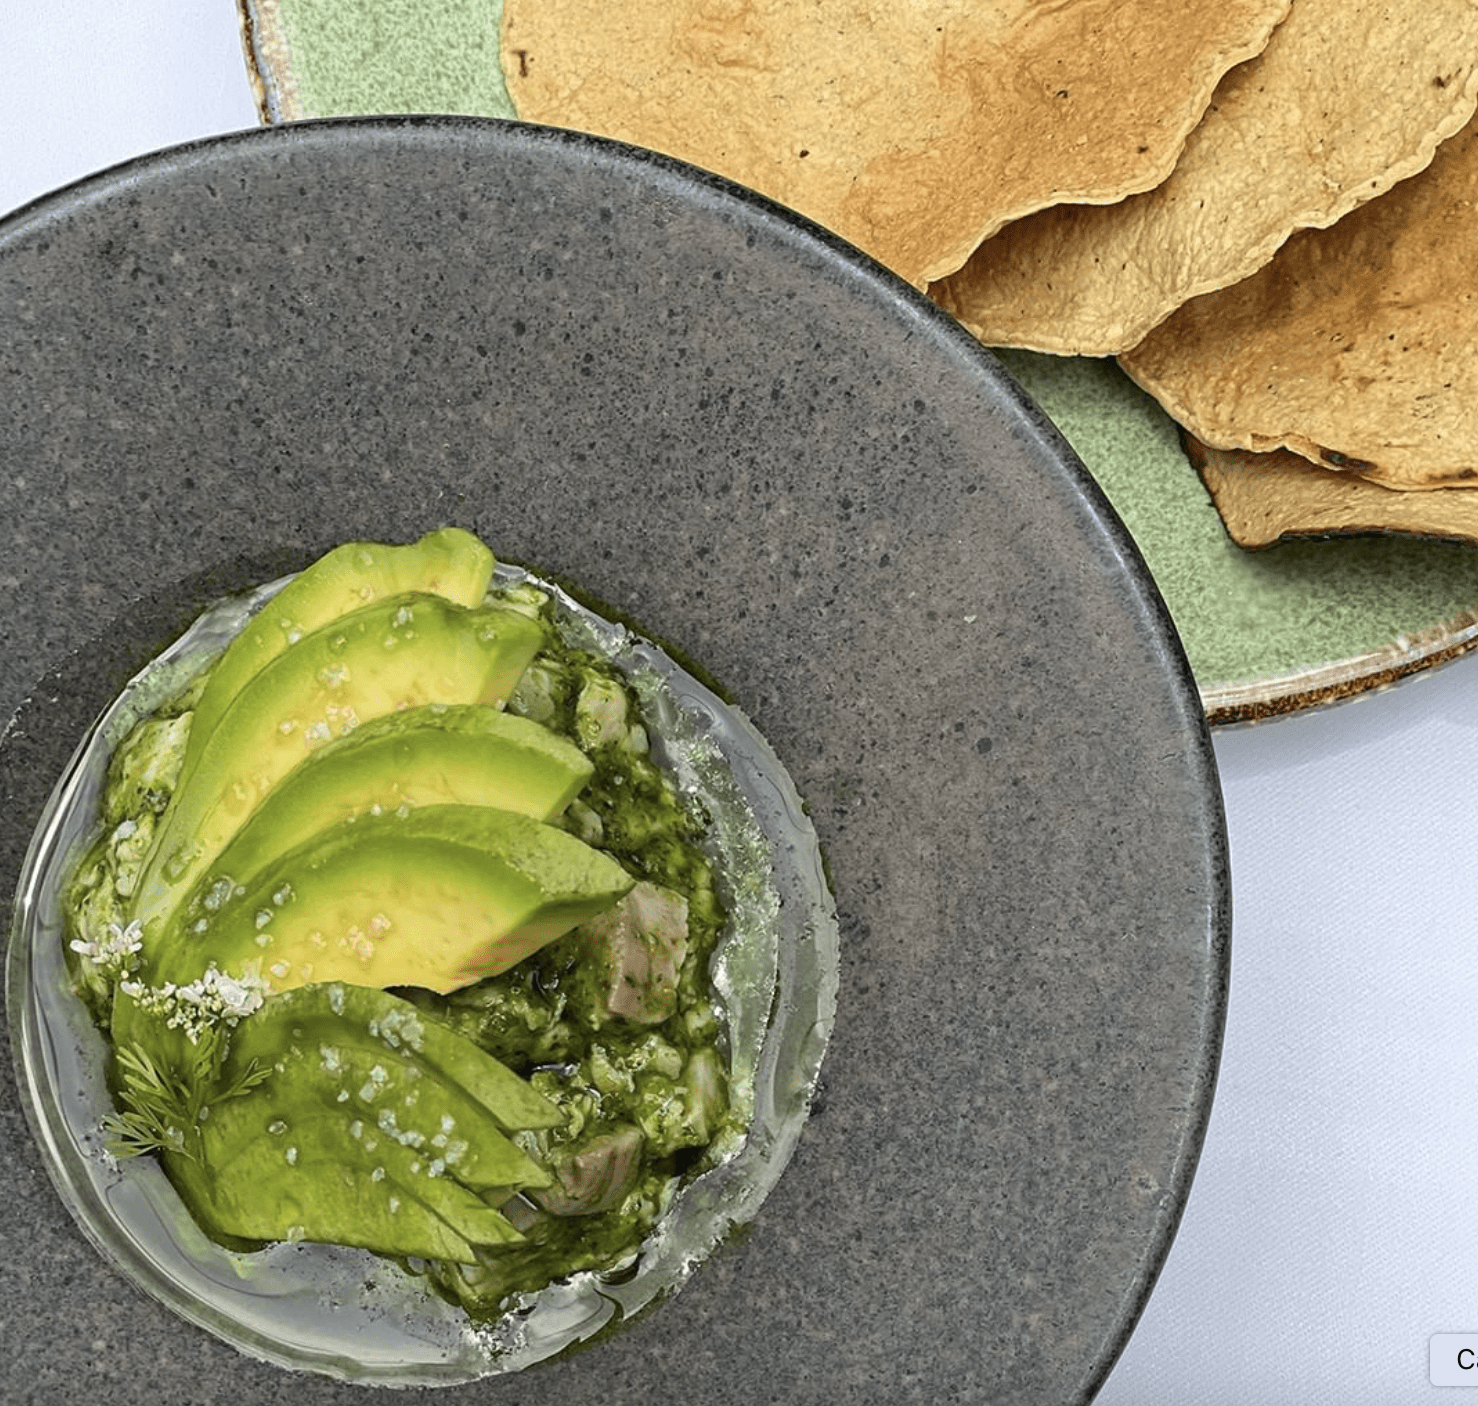 The best restaurants in Mexico City | A bowl of sliced avocado at Nicos